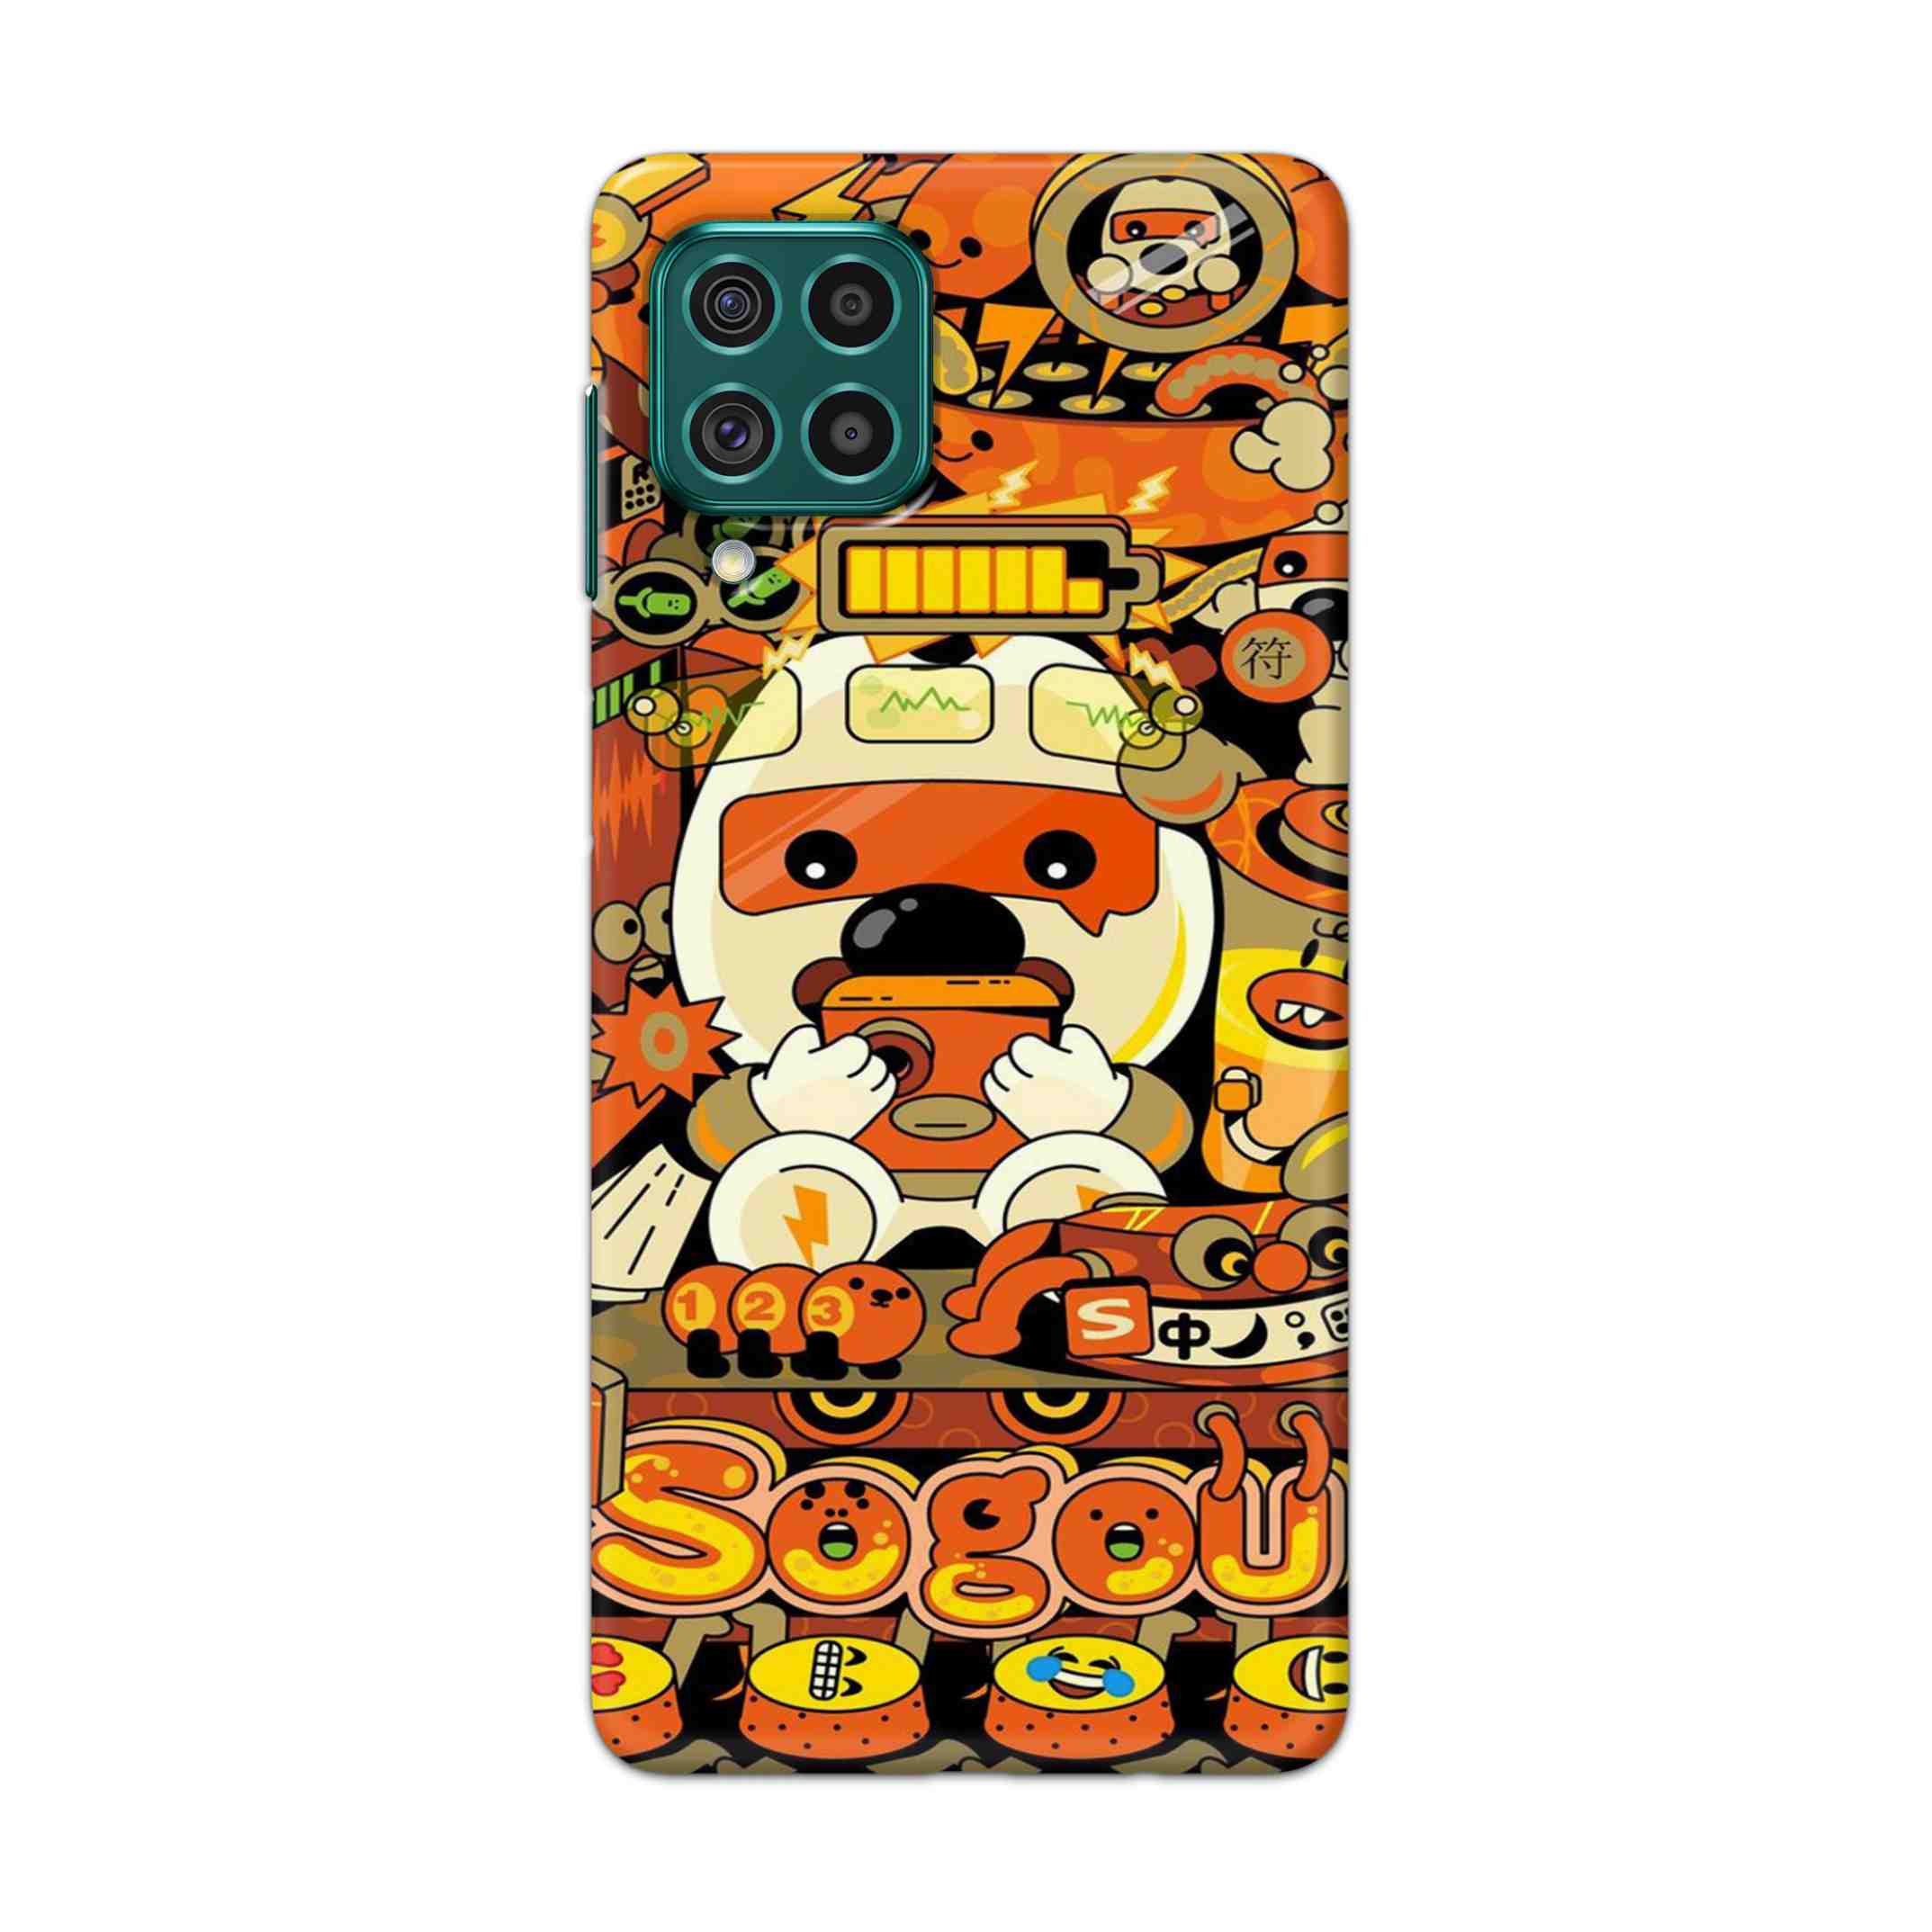 Buy Sogou Hard Back Mobile Phone Case Cover For Galaxy F62 Online